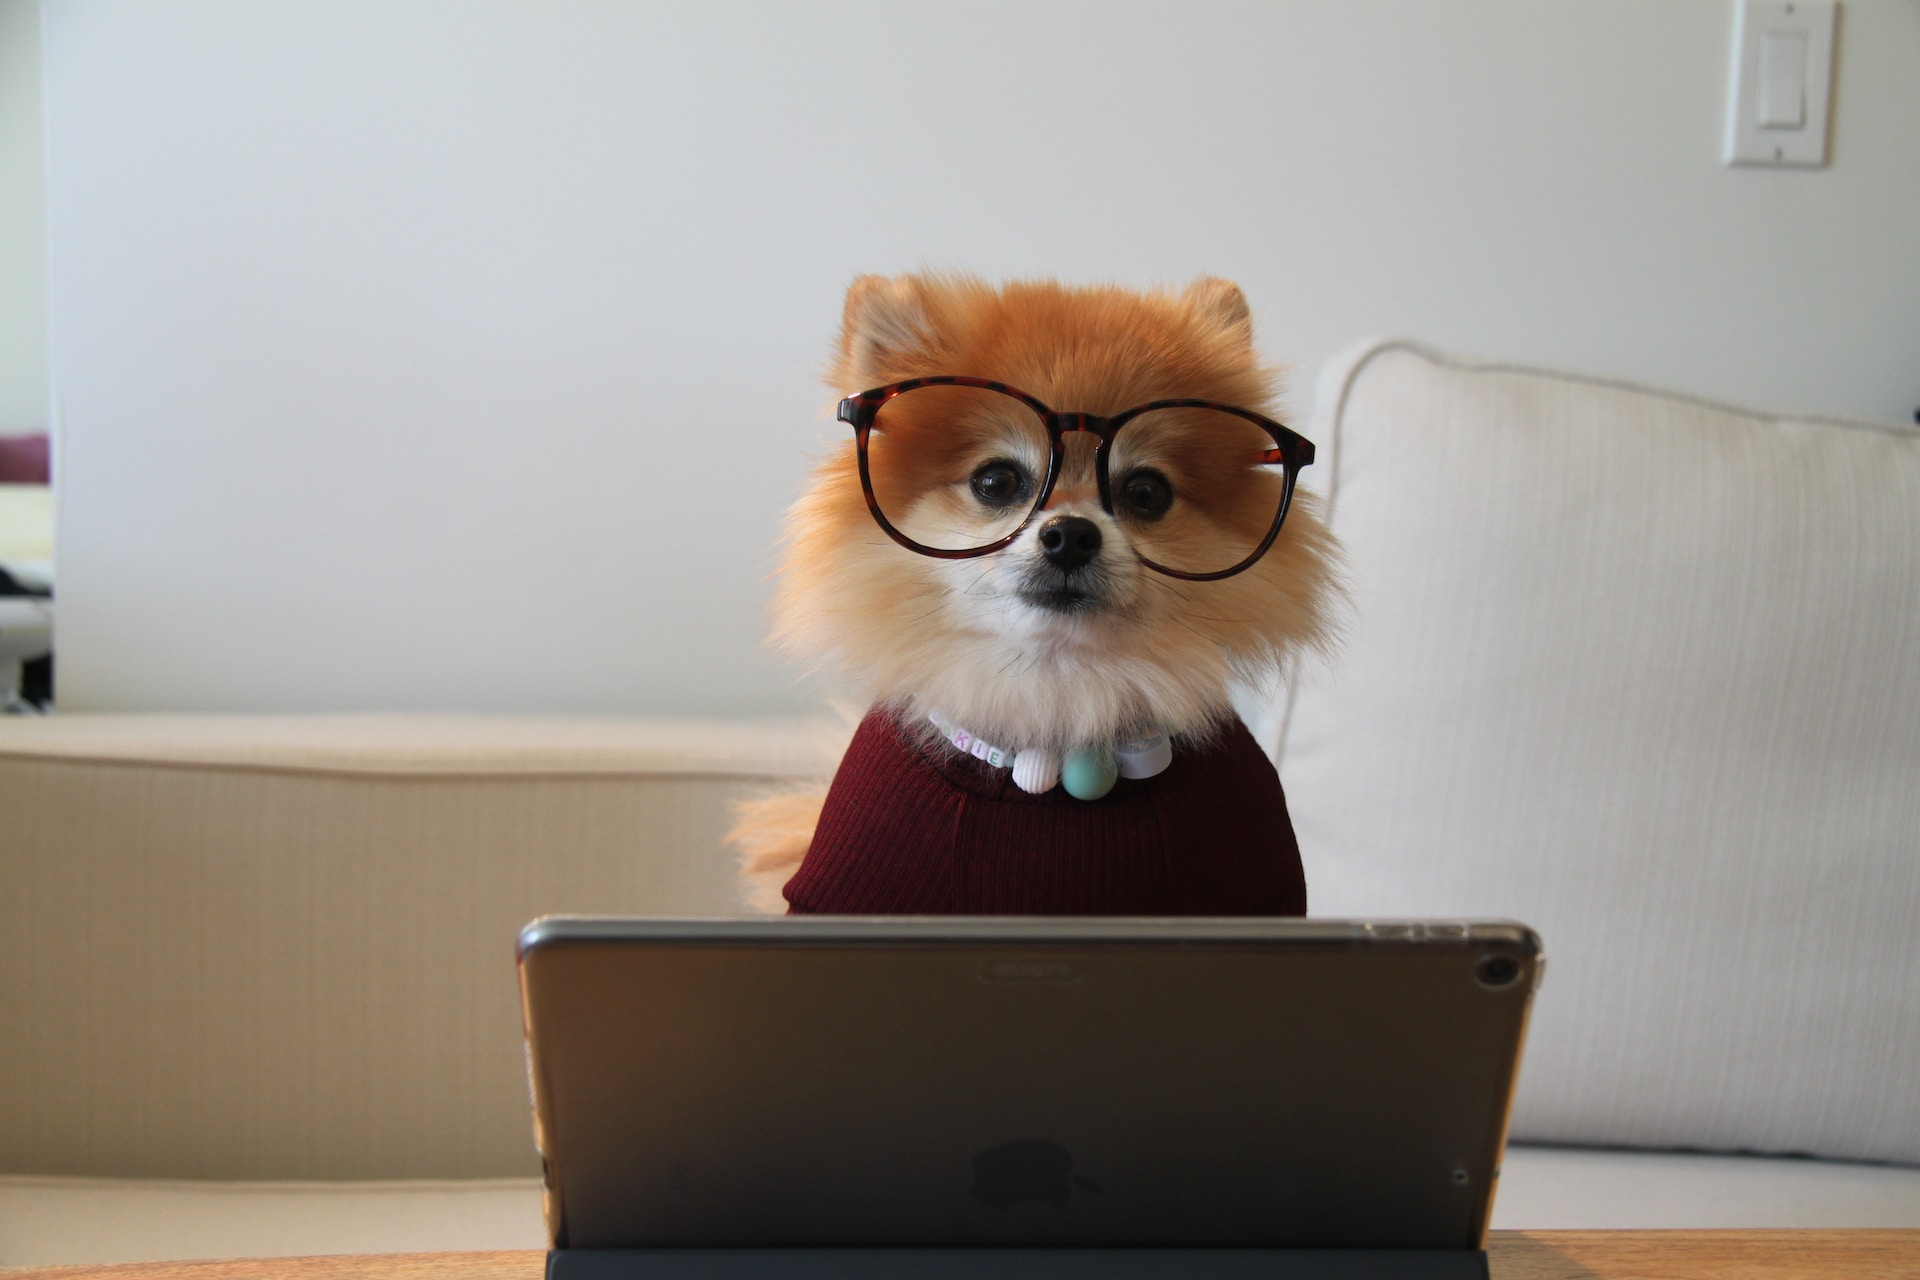 A Fox with glasses looking at an iPad